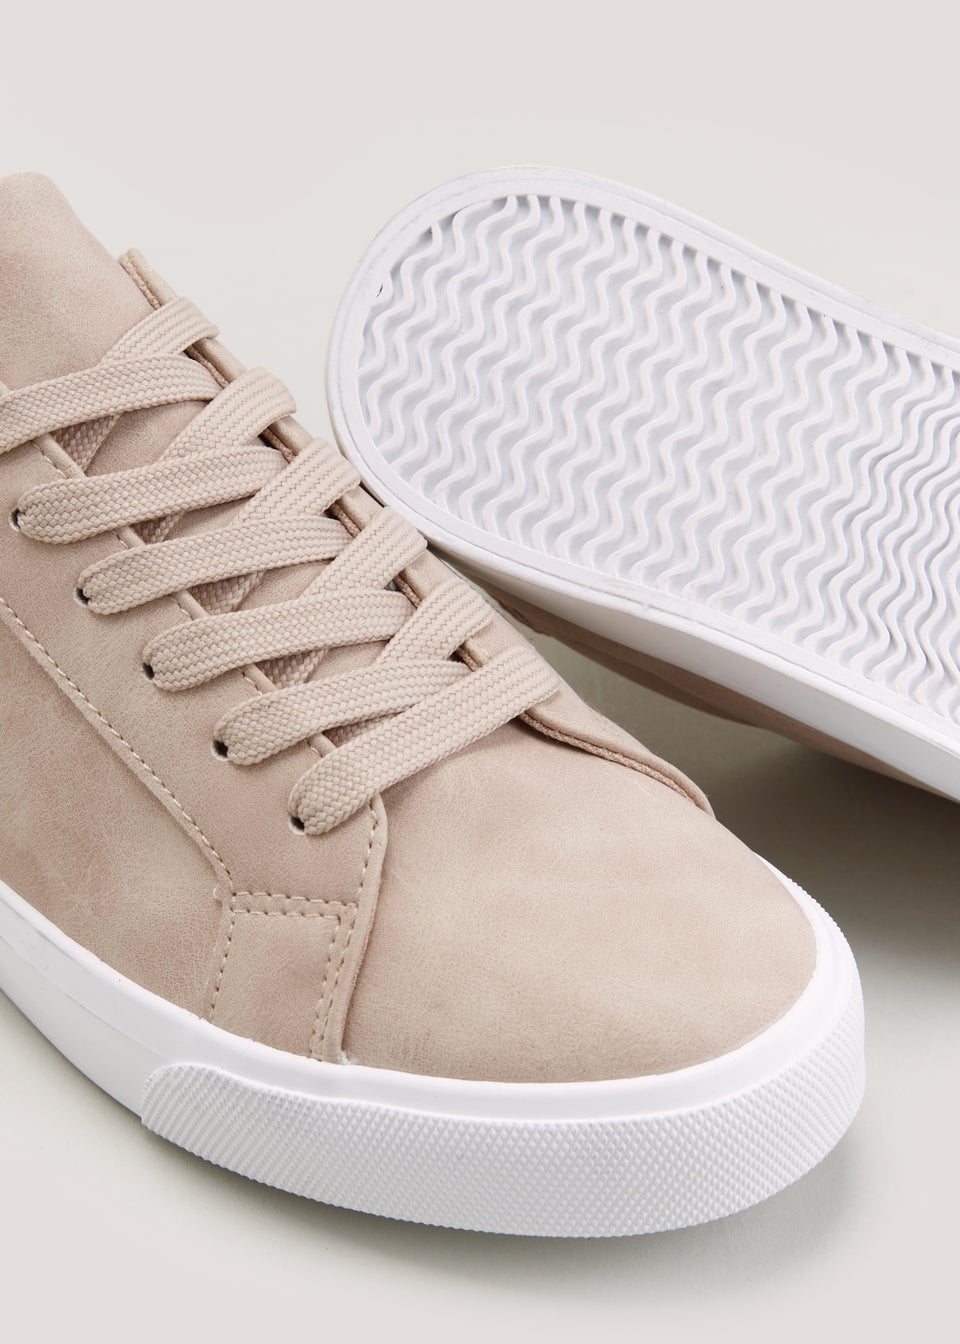 Nude Lace Up Trainers - Matalan